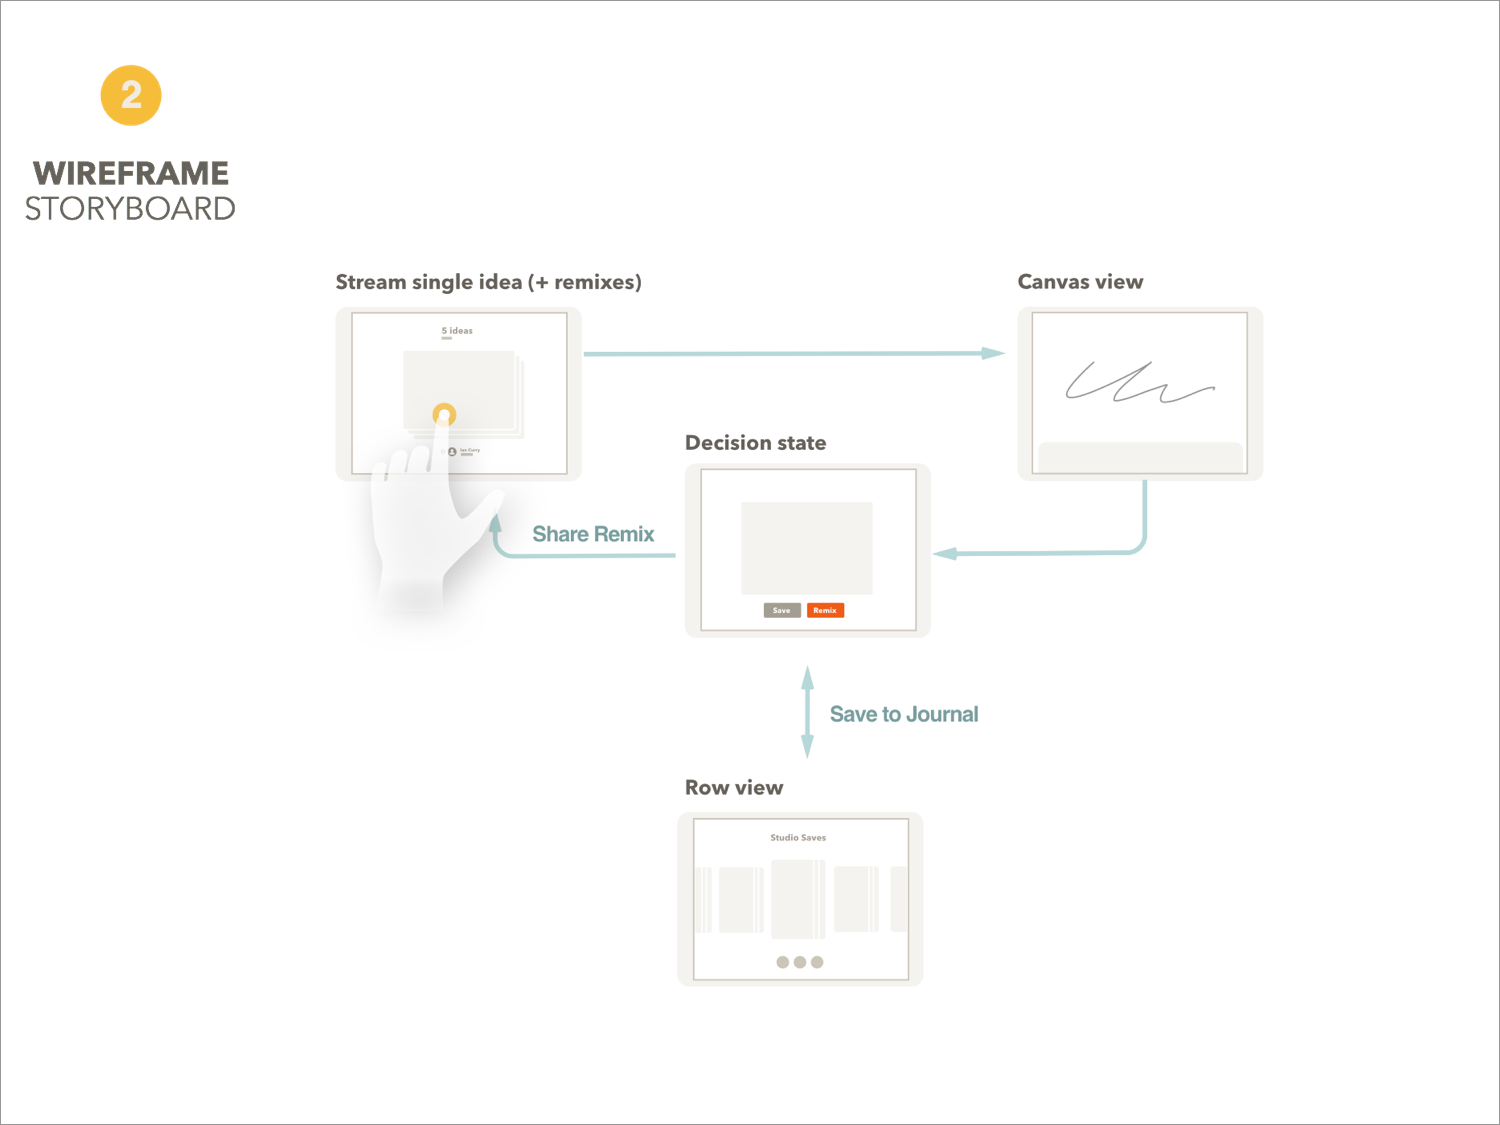  We wireframed most views and flows in Sketch to get feedback from product and engineering.&nbsp; 